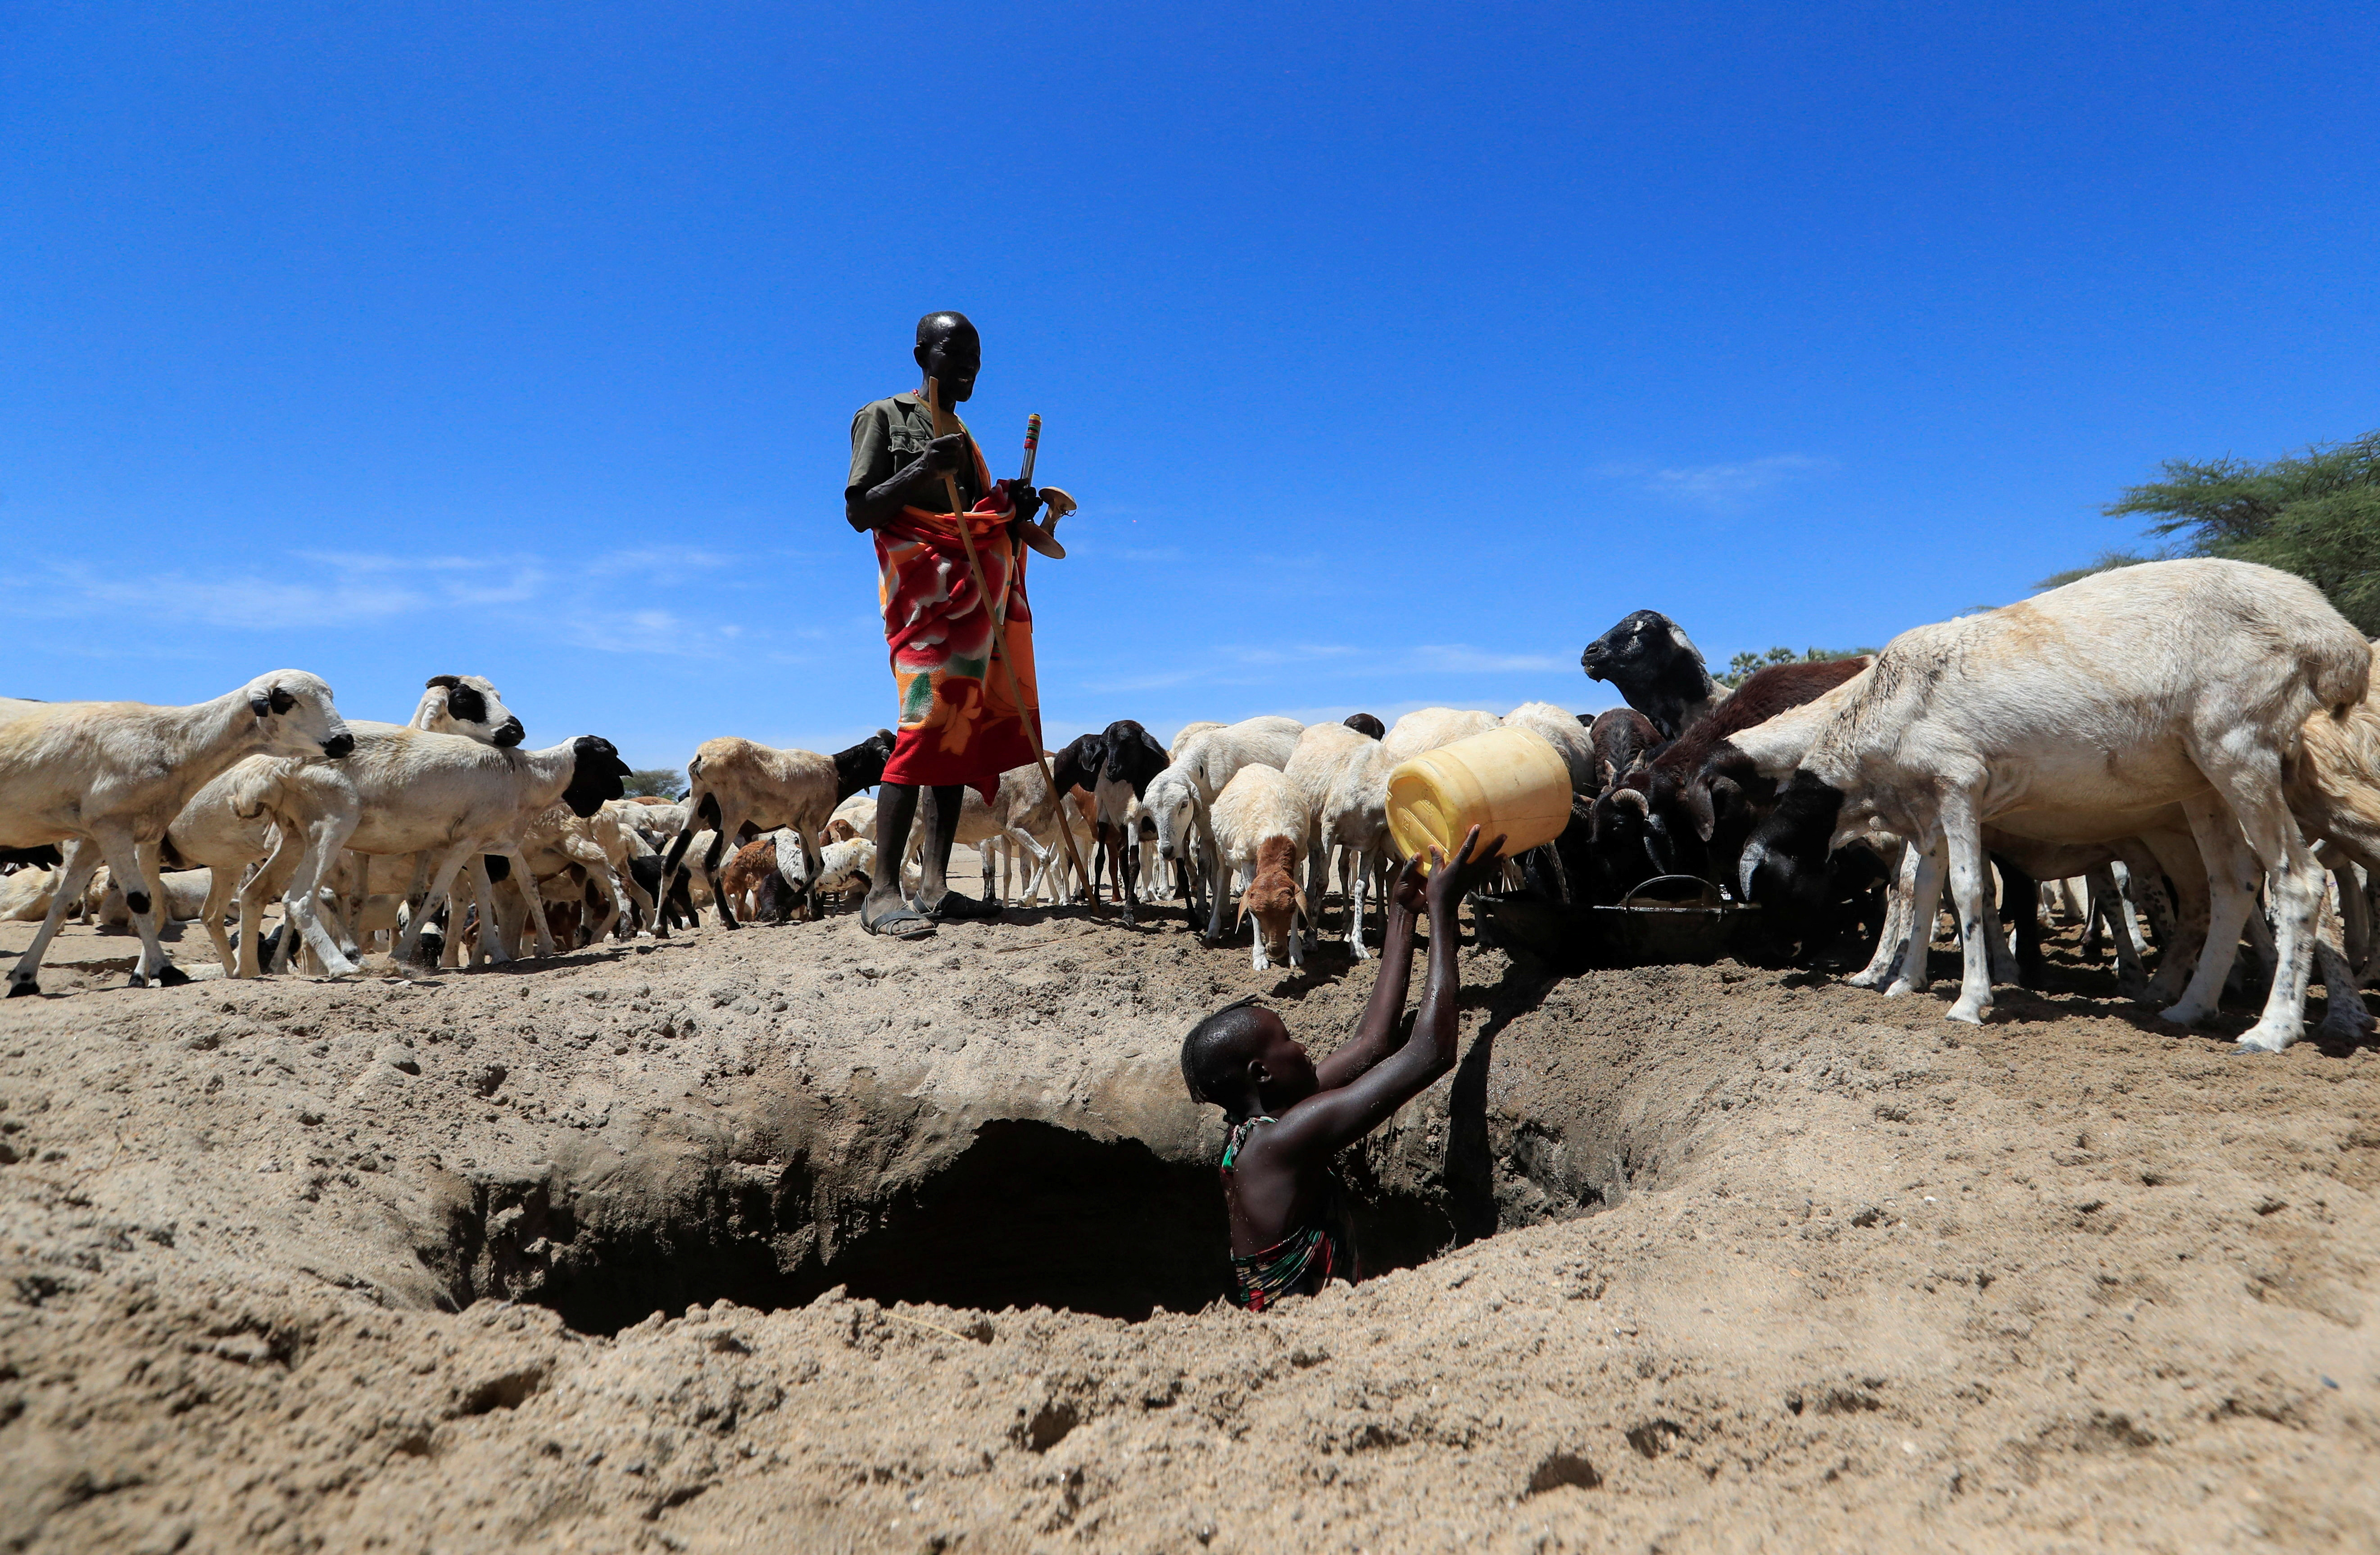 Loudi Lokoriyeng' from the Turkana pastoralist community affected by the worsening drought due to failed rain seasons, watches while his goats drink water from an open well dug on a dry riverbed in Loyoro village of Kalokol in Turkana